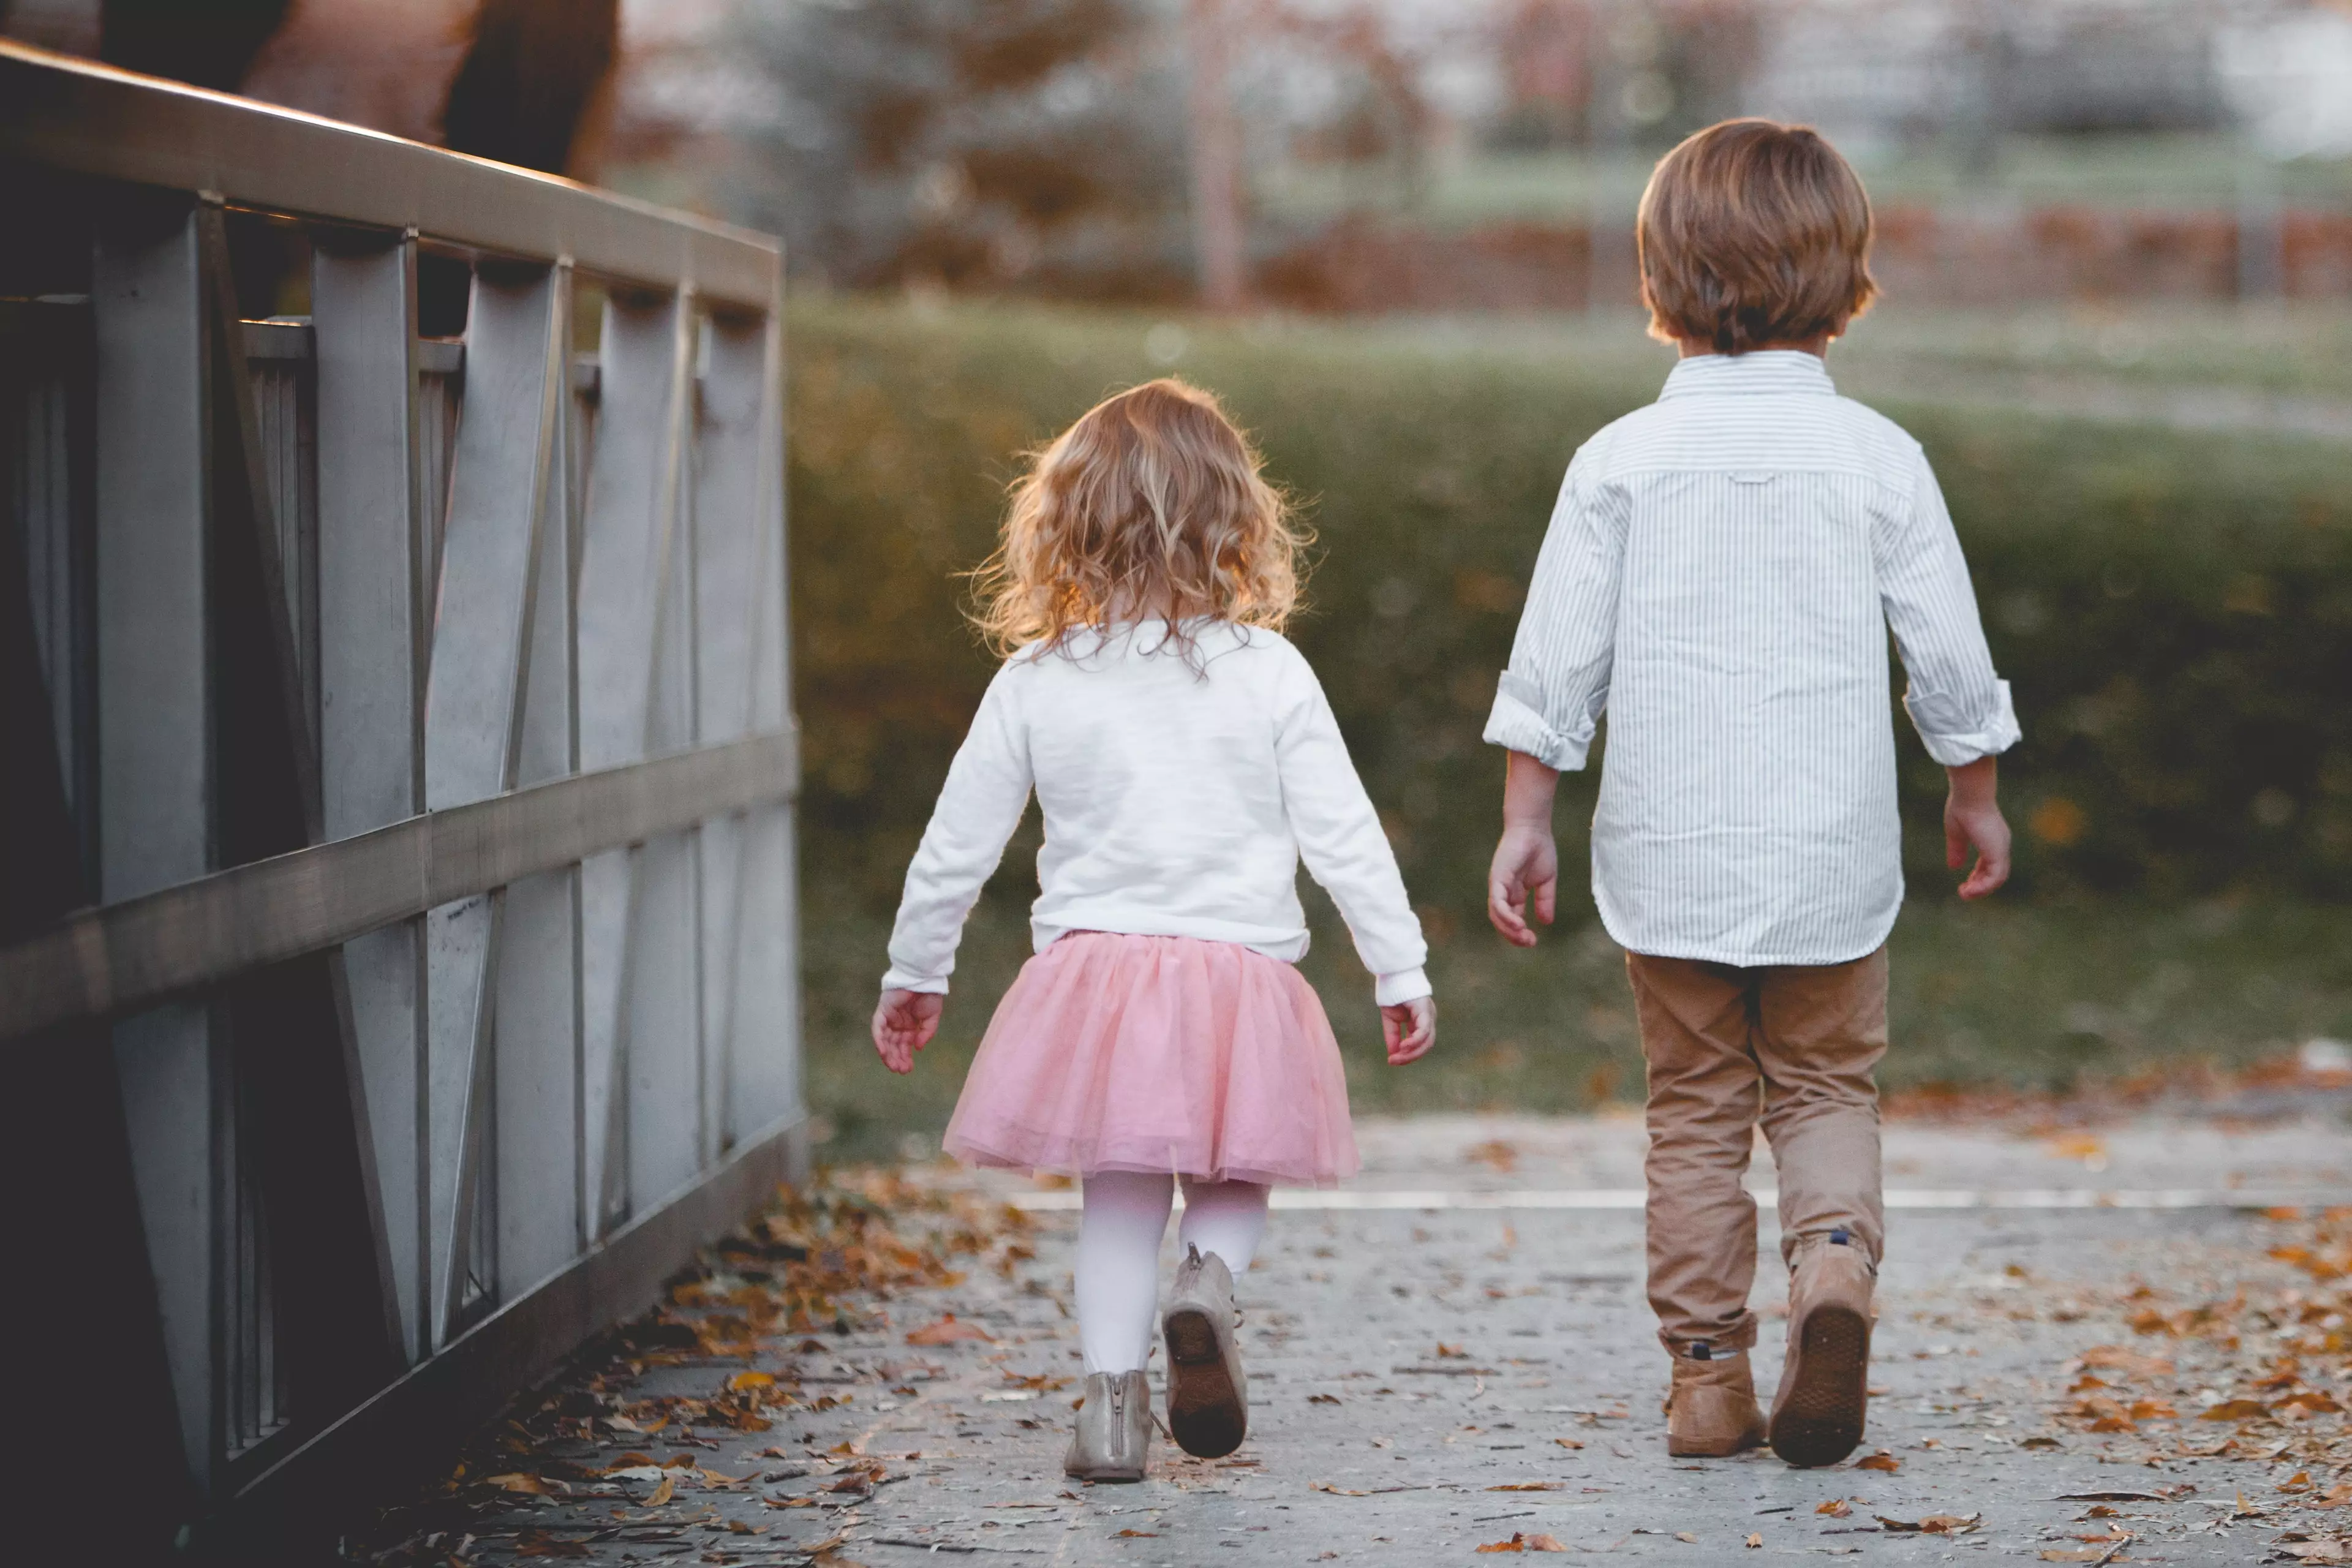 Parental time investment could be a possible cause for the second sibling's misbehaviour (